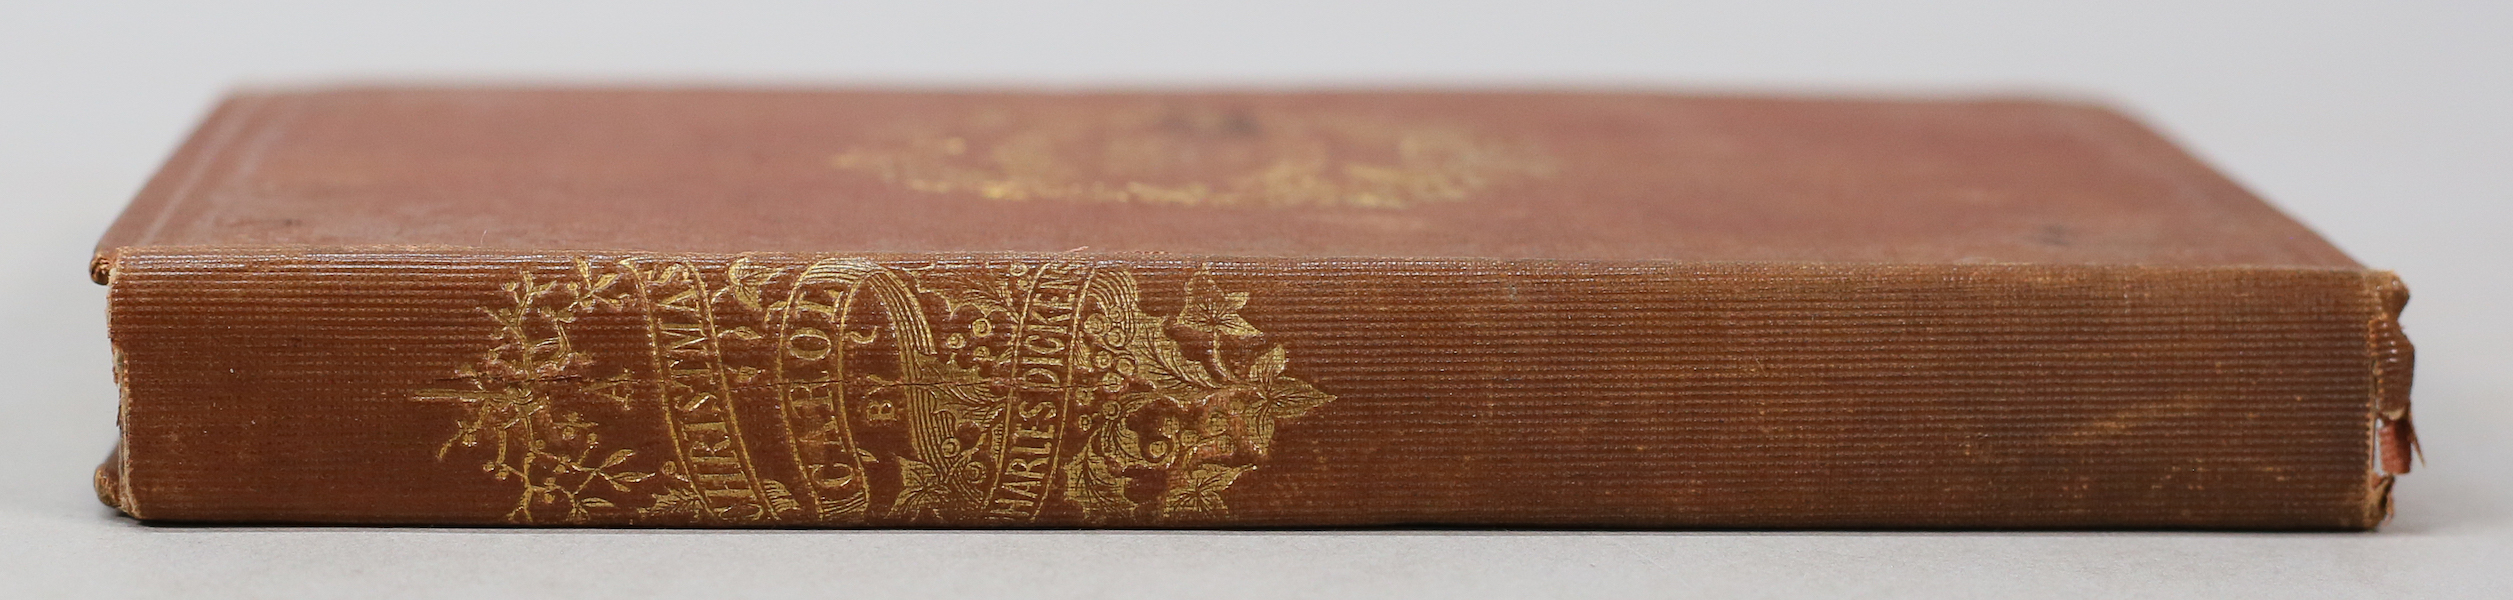 First edition of ‘A Christmas Carol,’ estimated at $2,000-$3,000